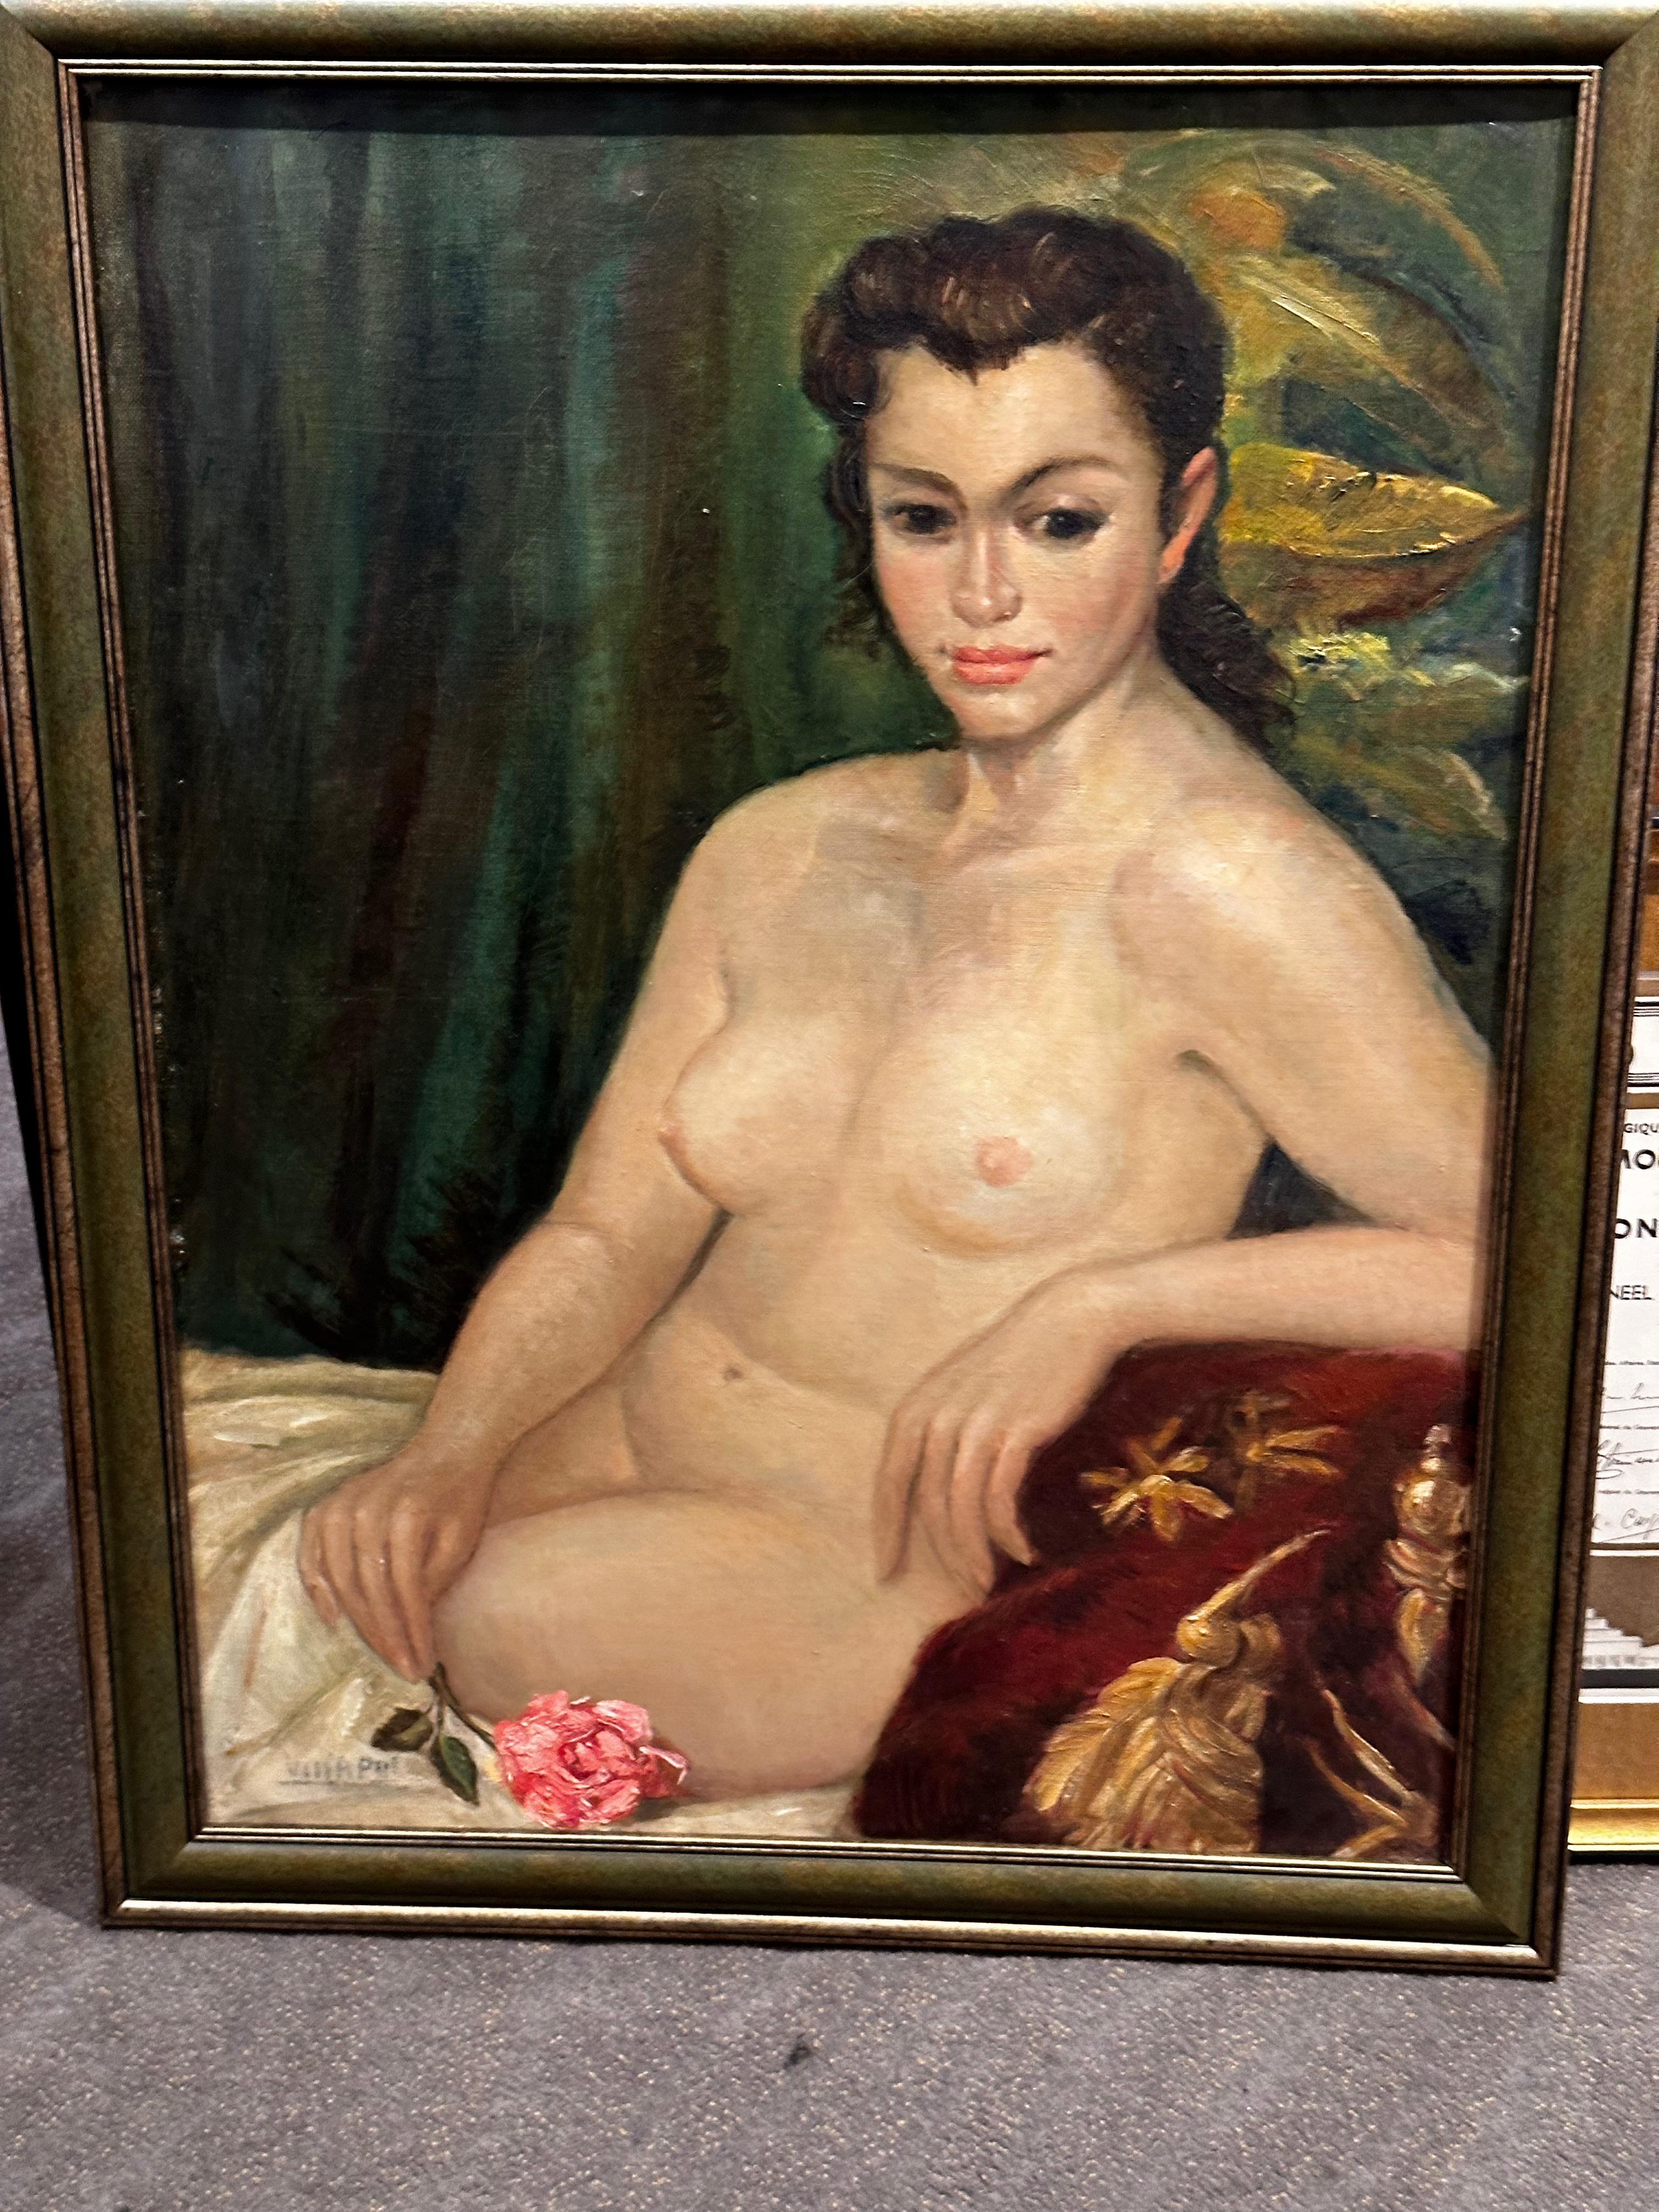 A classic Art Deco Nude Oil Painting of a woman holding a single rose that projects beauty and serenity.

A reclining nude is the essence of what is pure and natural yet also desirable and forbidden.  Nude images are universal and timeless, yet the